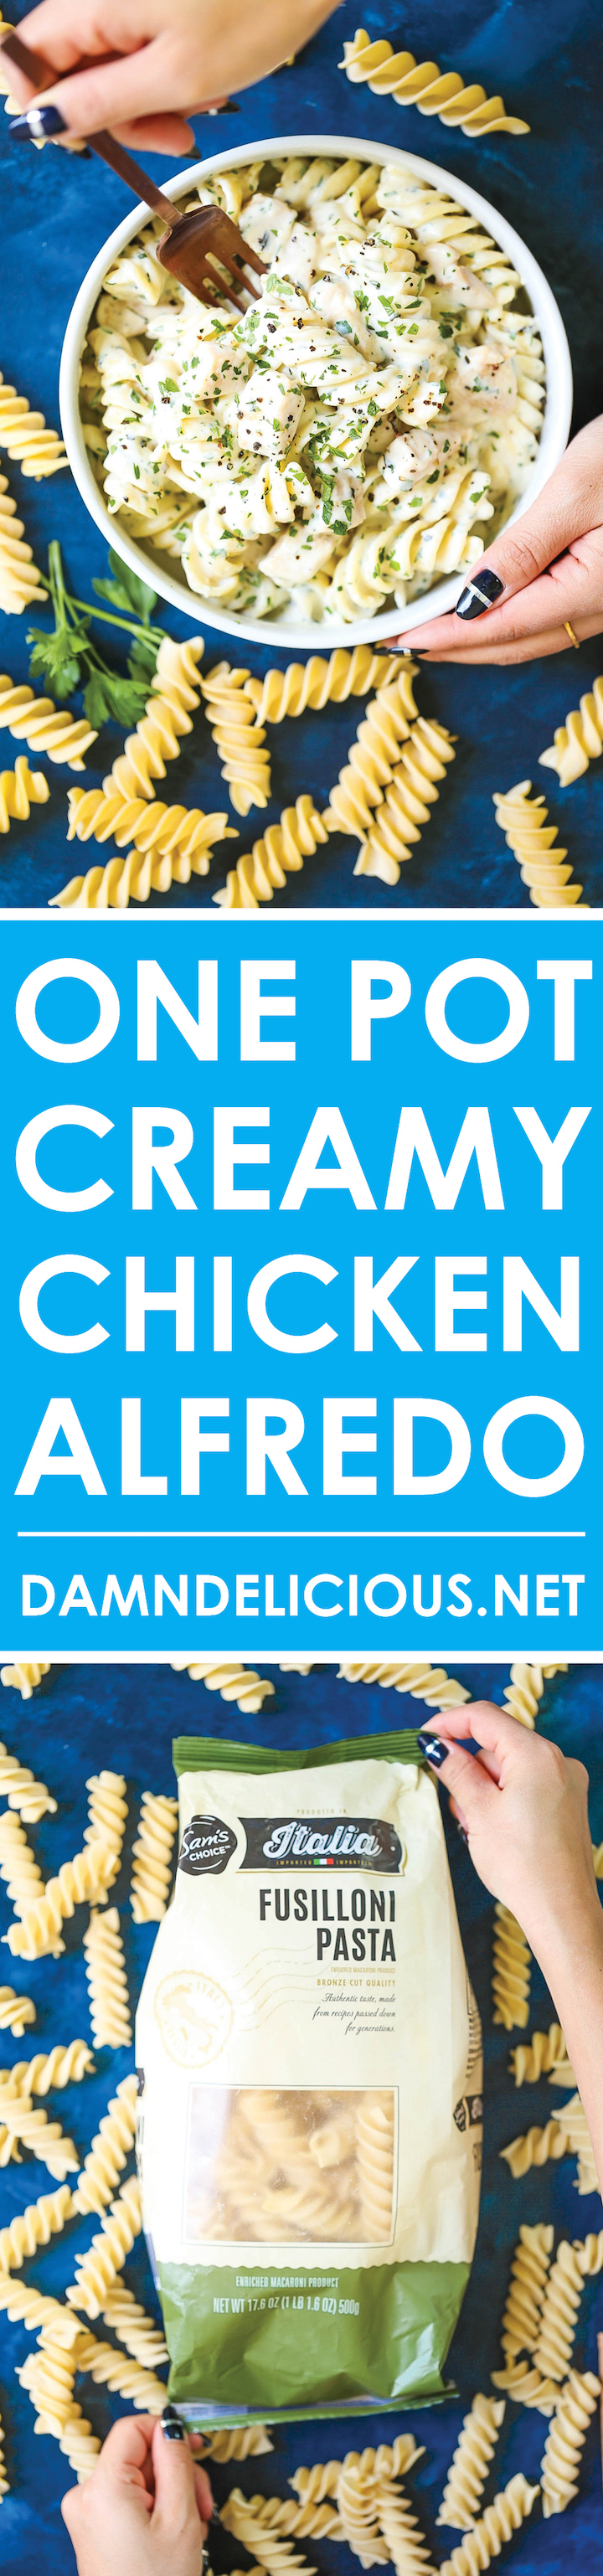 One Pot Creamy Chicken Alfredo - A super simple, easy peasy chicken alfredo dinner! Everything – the chicken and even the pasta – all gets cooked in ONE single pot. Hello? Easiest clean up ever, right?!